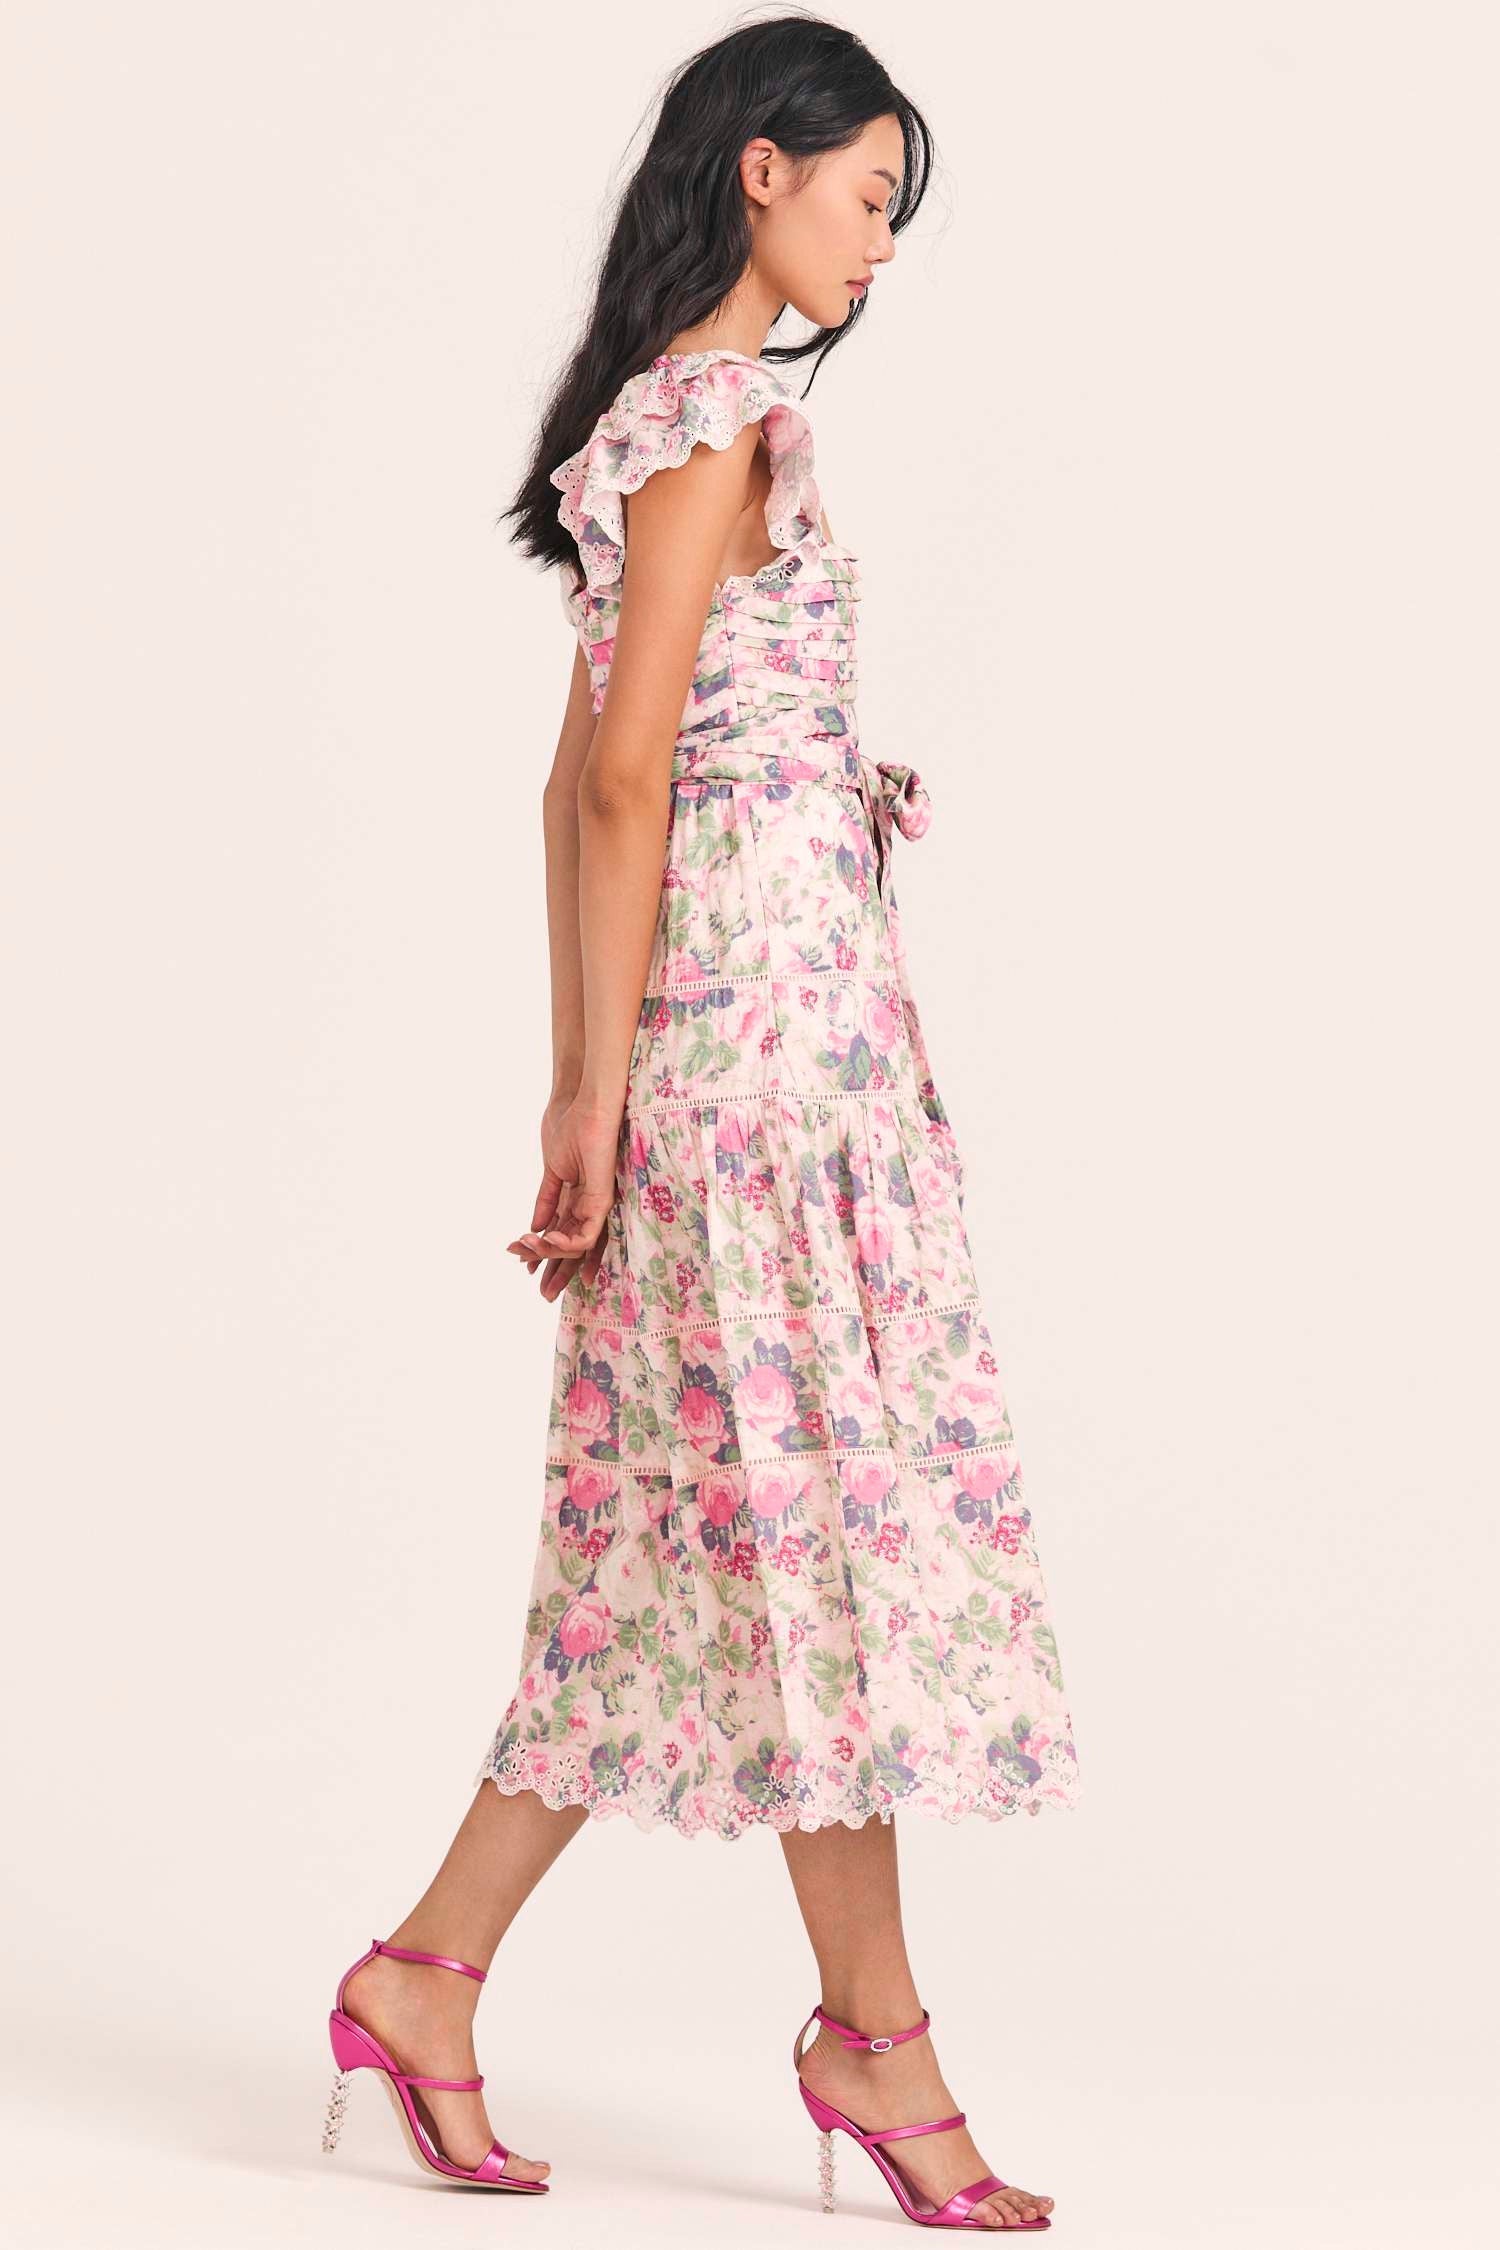 Women's rose print eyelet embroidered maxi dress